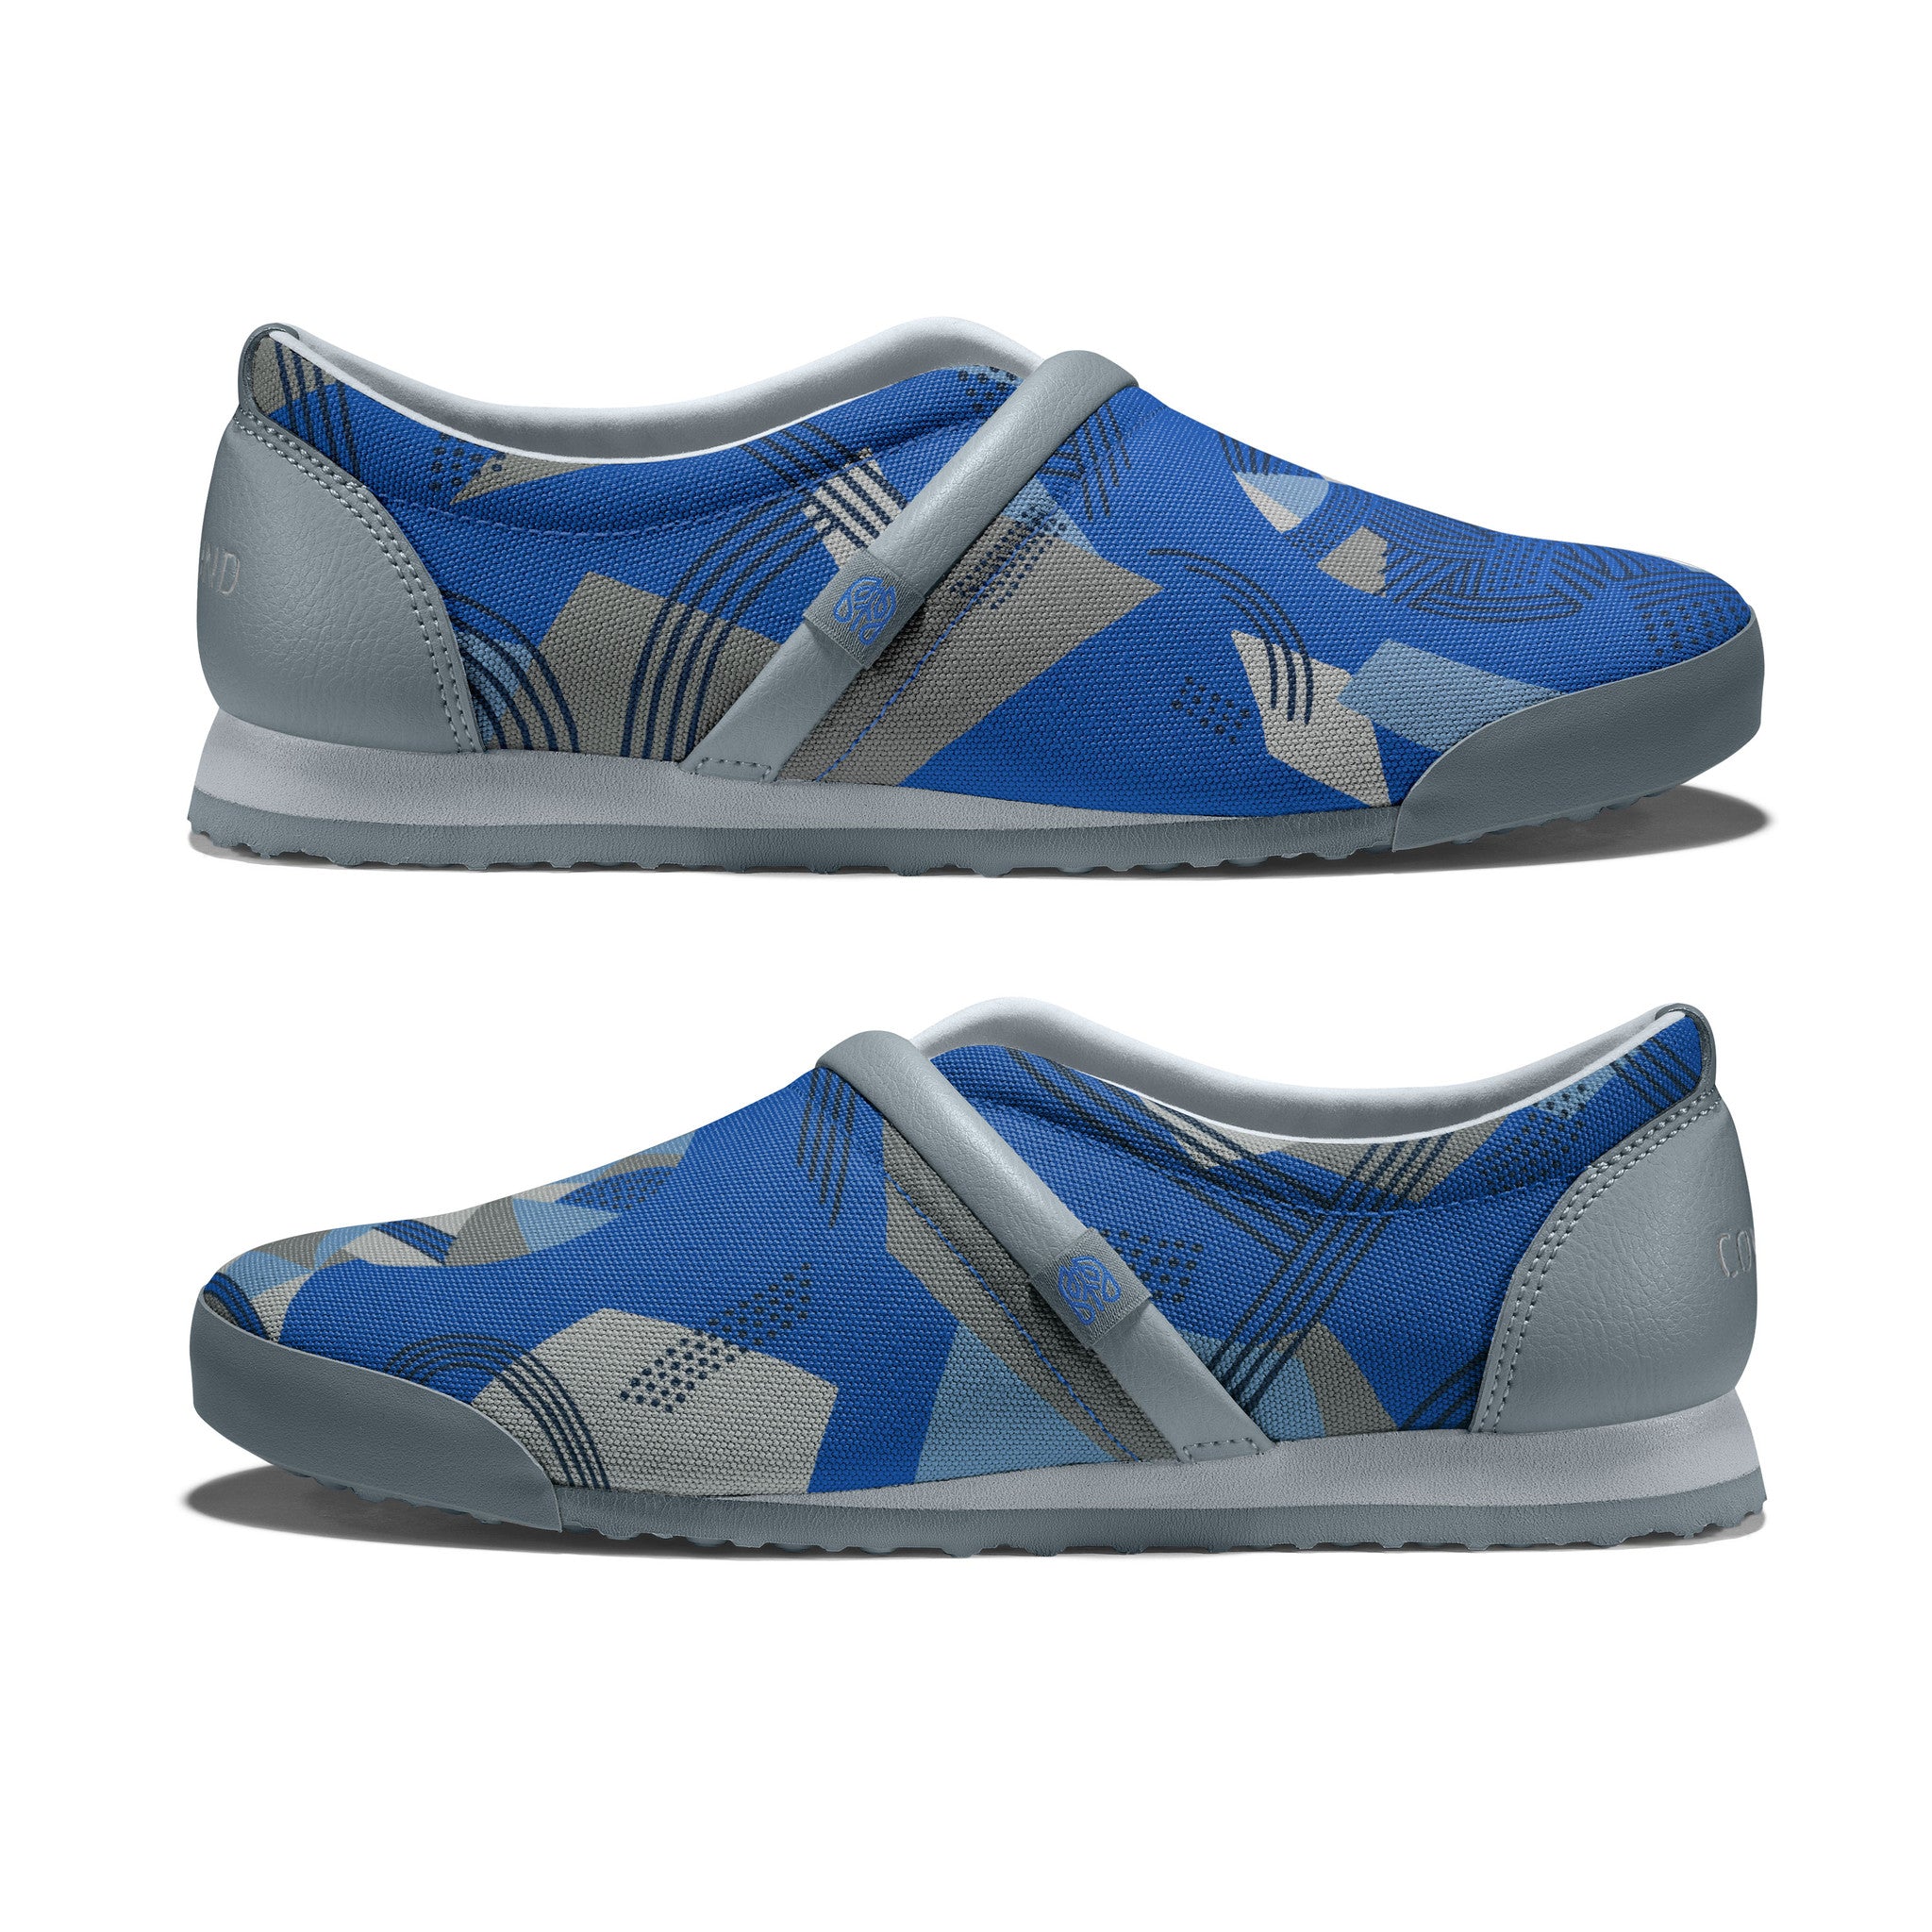 Strong_Blue - Common Ground Footwear Shoes Side View